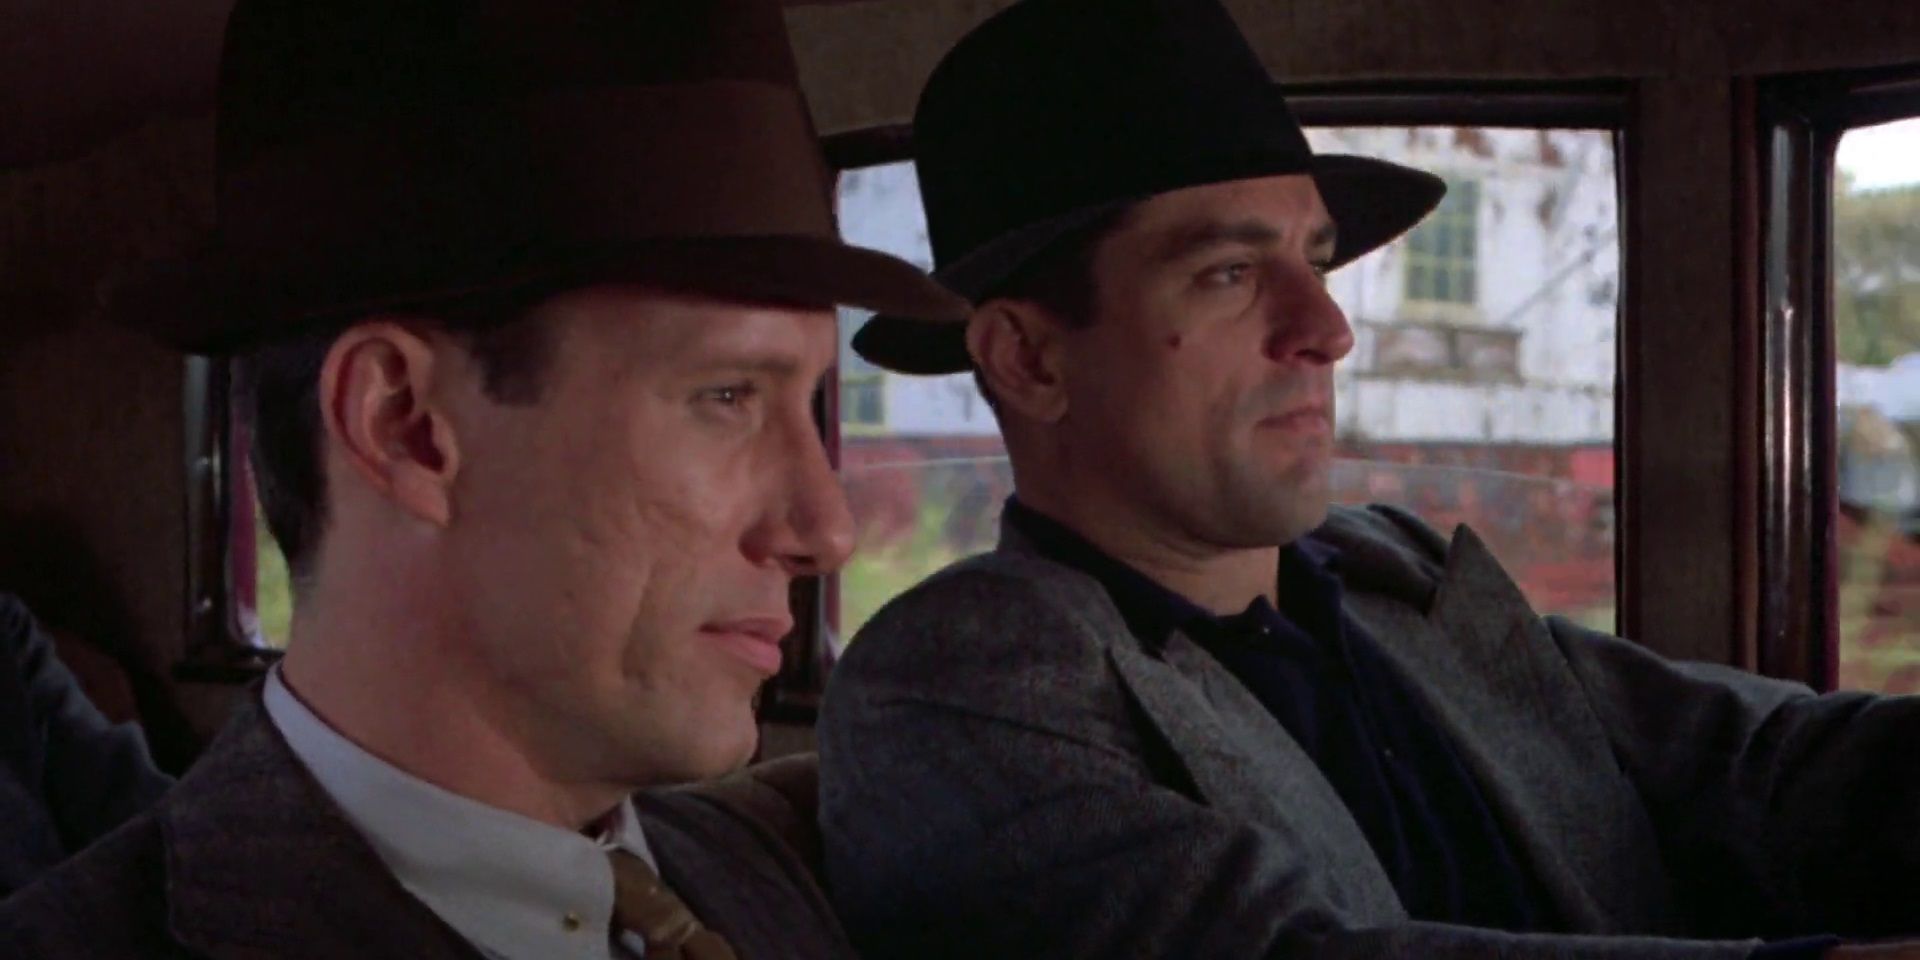 Robert De Niro and James Woods in Once Upon a Time in America